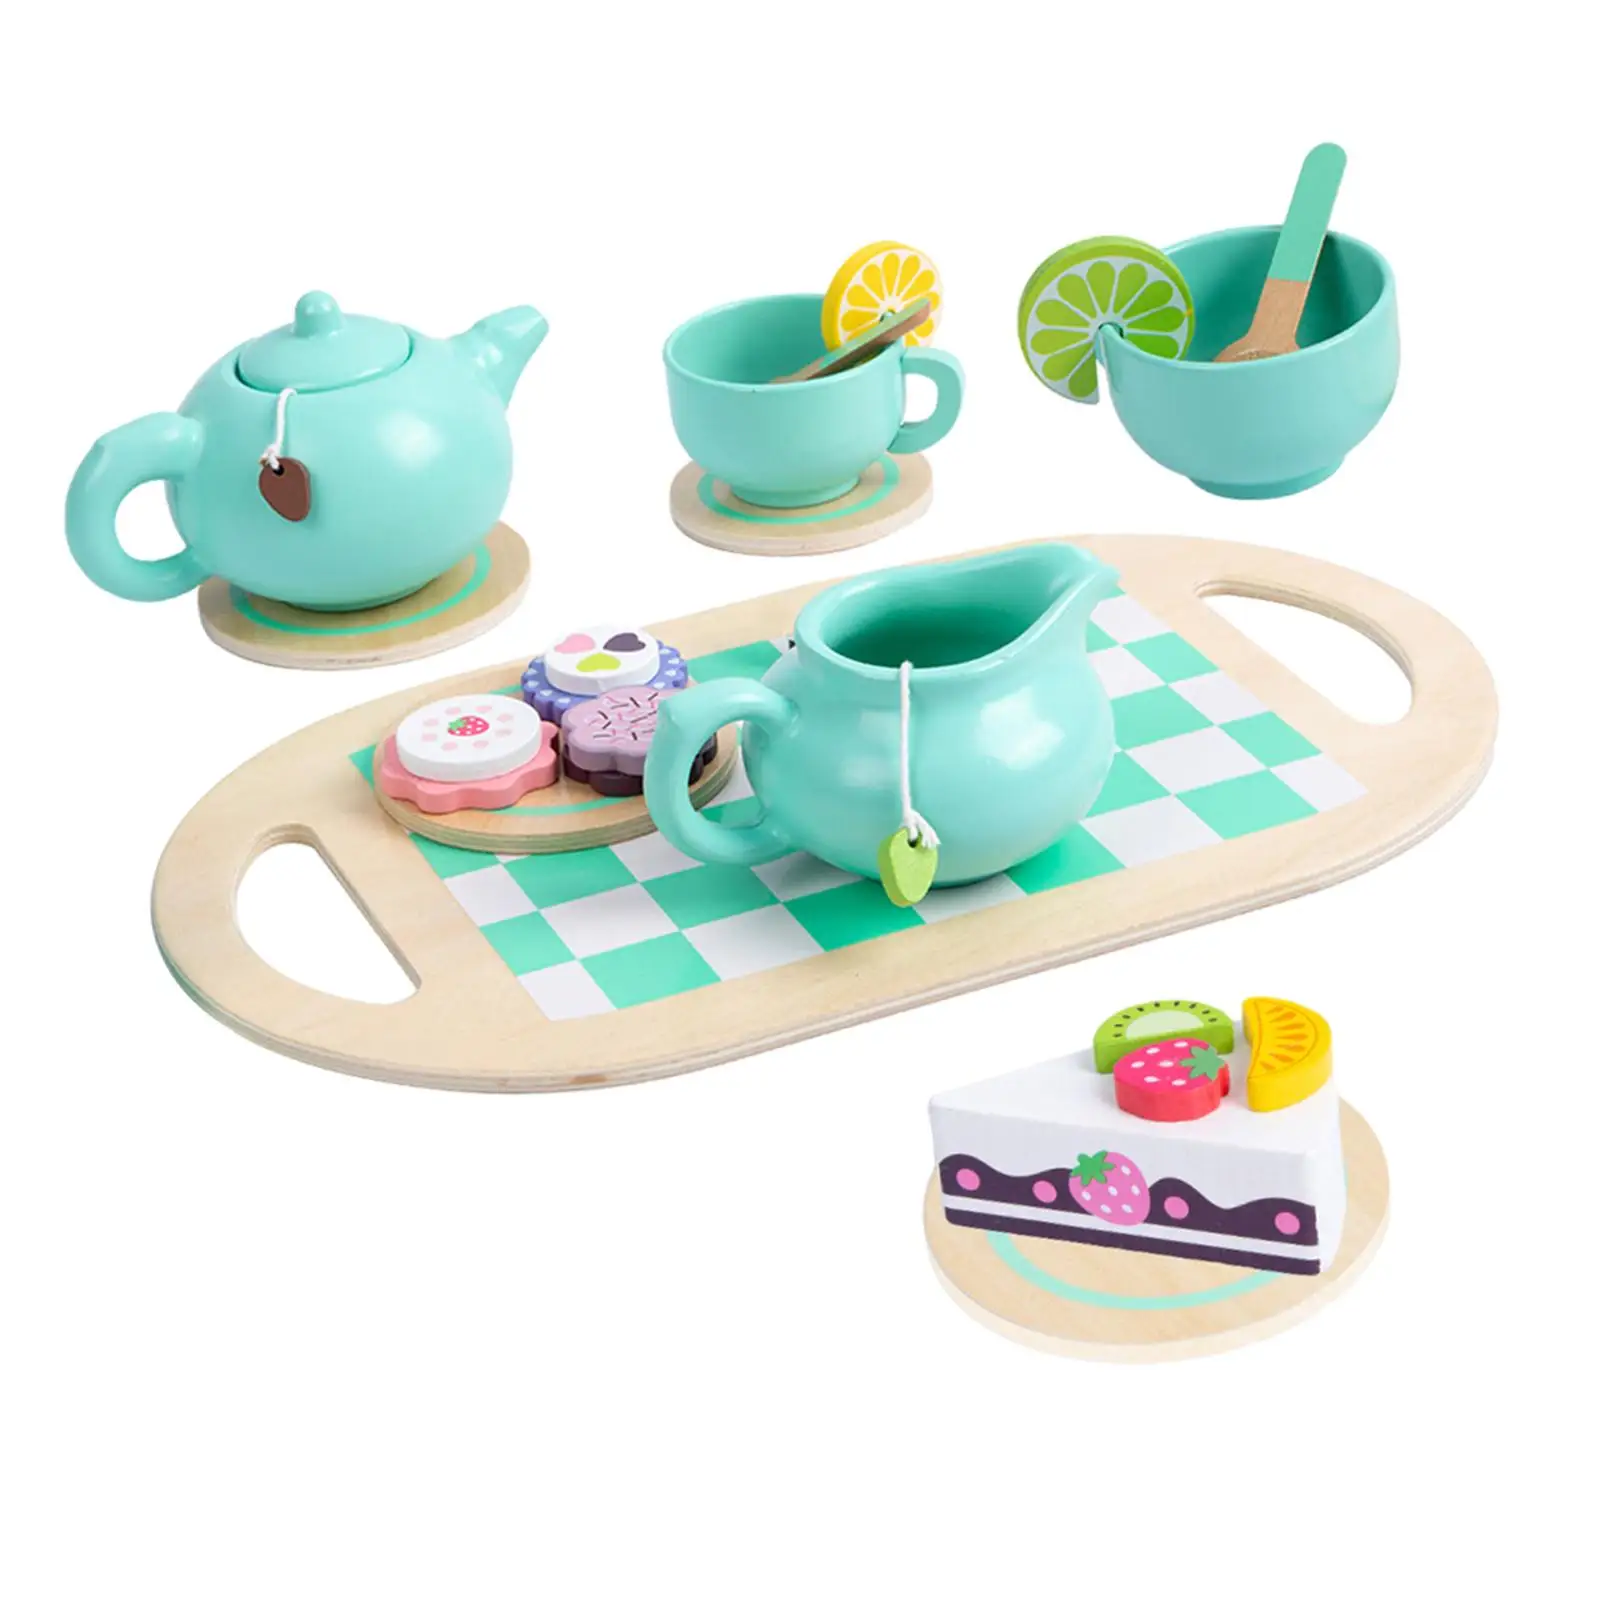 Wooden Afternoon Tea Set Toy Kitchen Accessories Handiccraft Toy Montessori Educational Pretend Playing Food for Birthday Gift